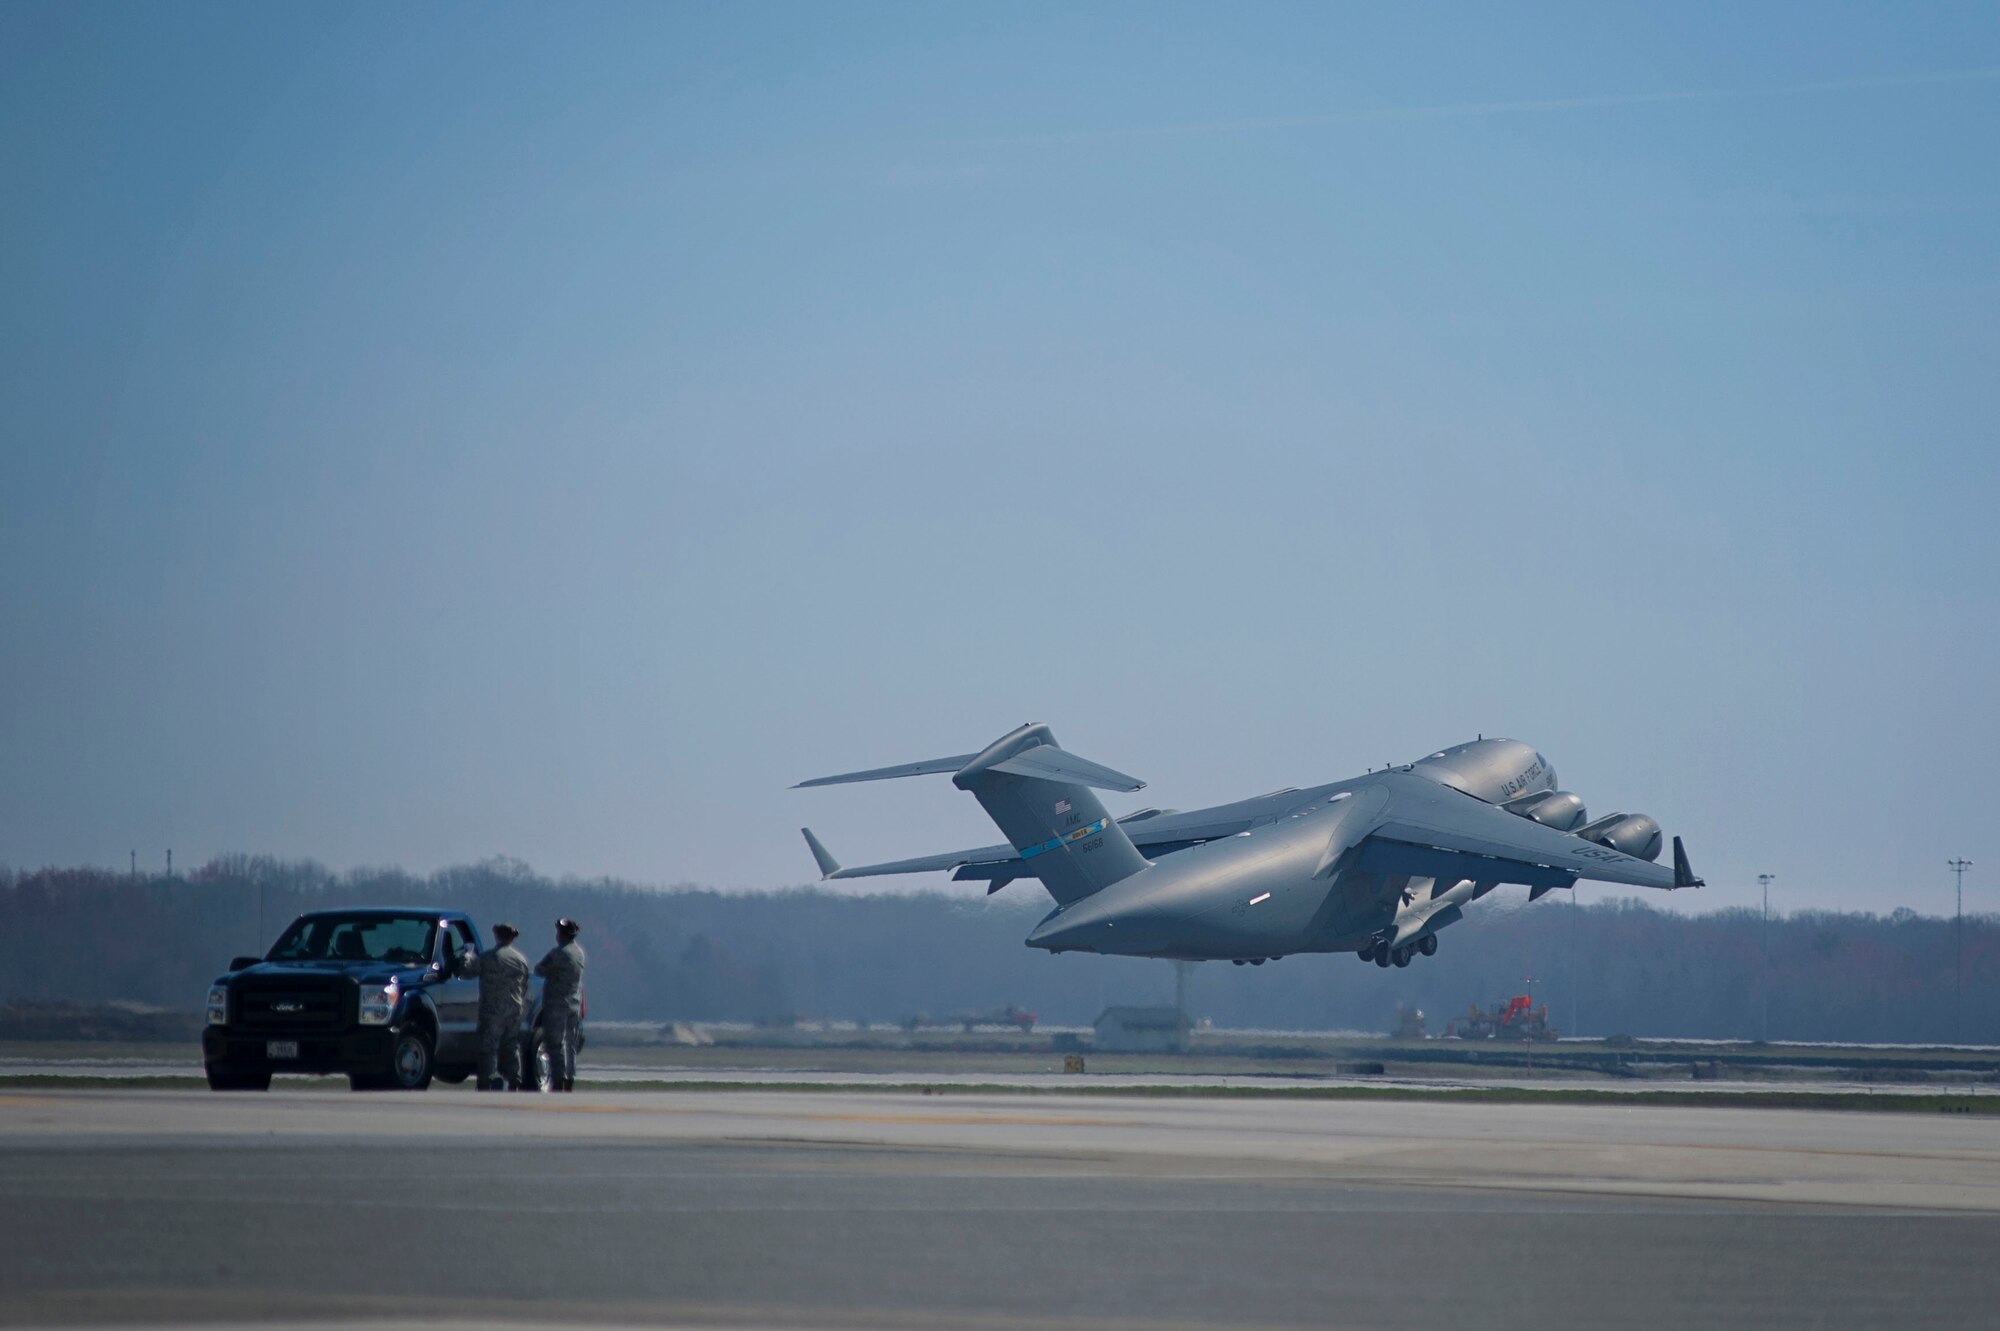 Team Dover maintenance personnel watch as a C-17 Globemaster III takes off from Dover Air Force Base, Del., March 17, 2016. Reservists and active duty Airmen work side-by-side daily in the maintenance and other career fields, promoting Total Force Integration within Team Dover. (U.S. Air Force photo/ Capt. Bernie Kale)